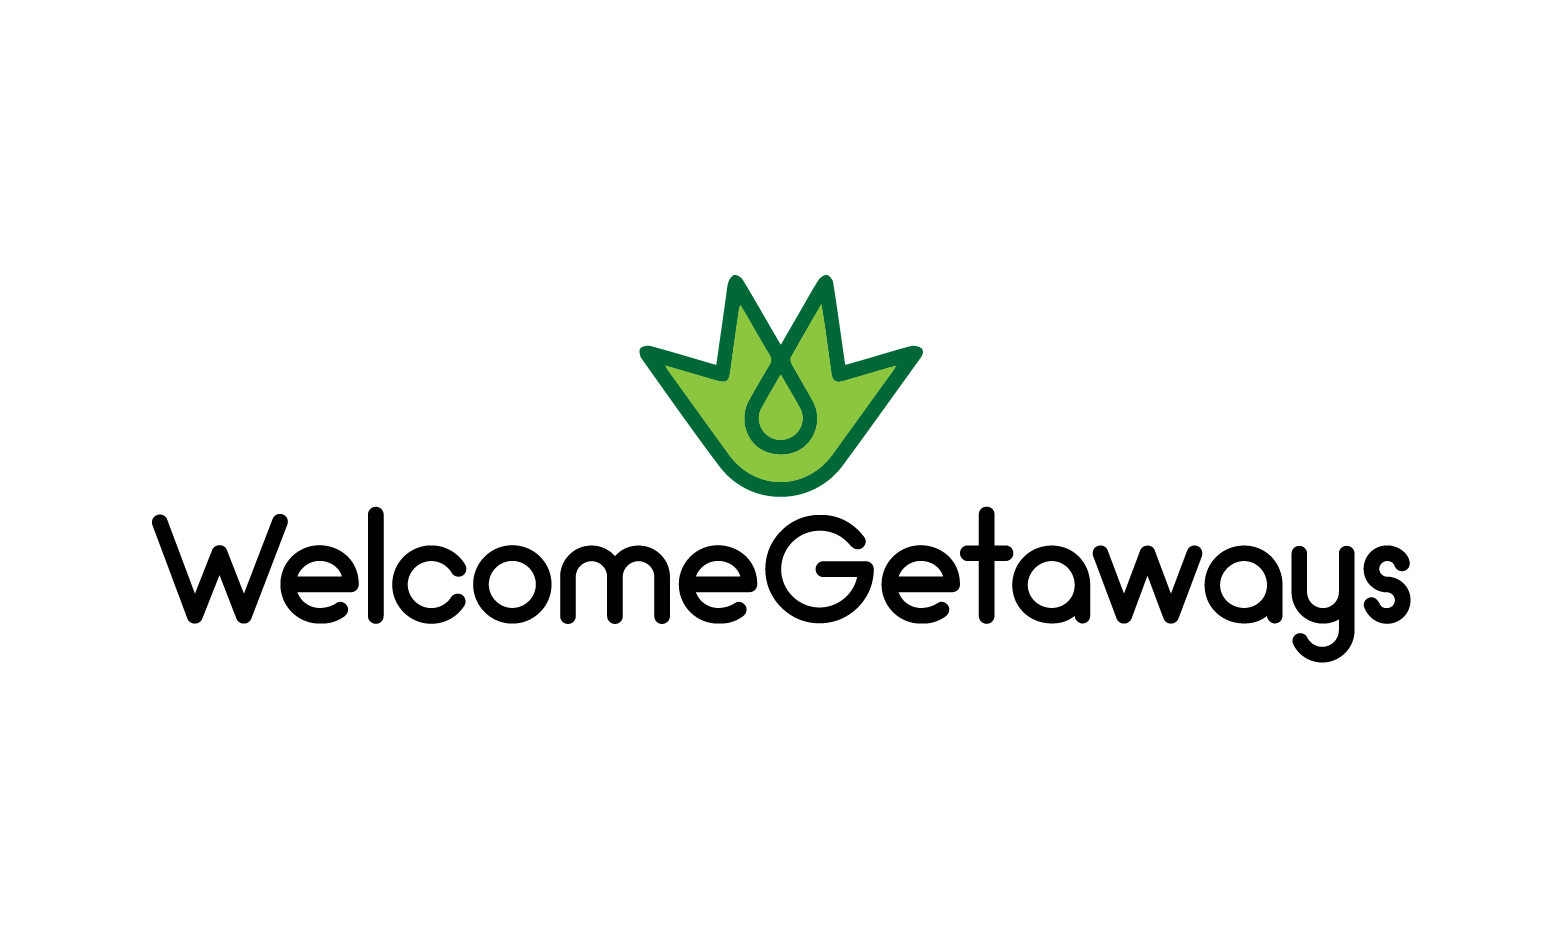 WelcomeGetaways.com - Creative brandable domain for sale